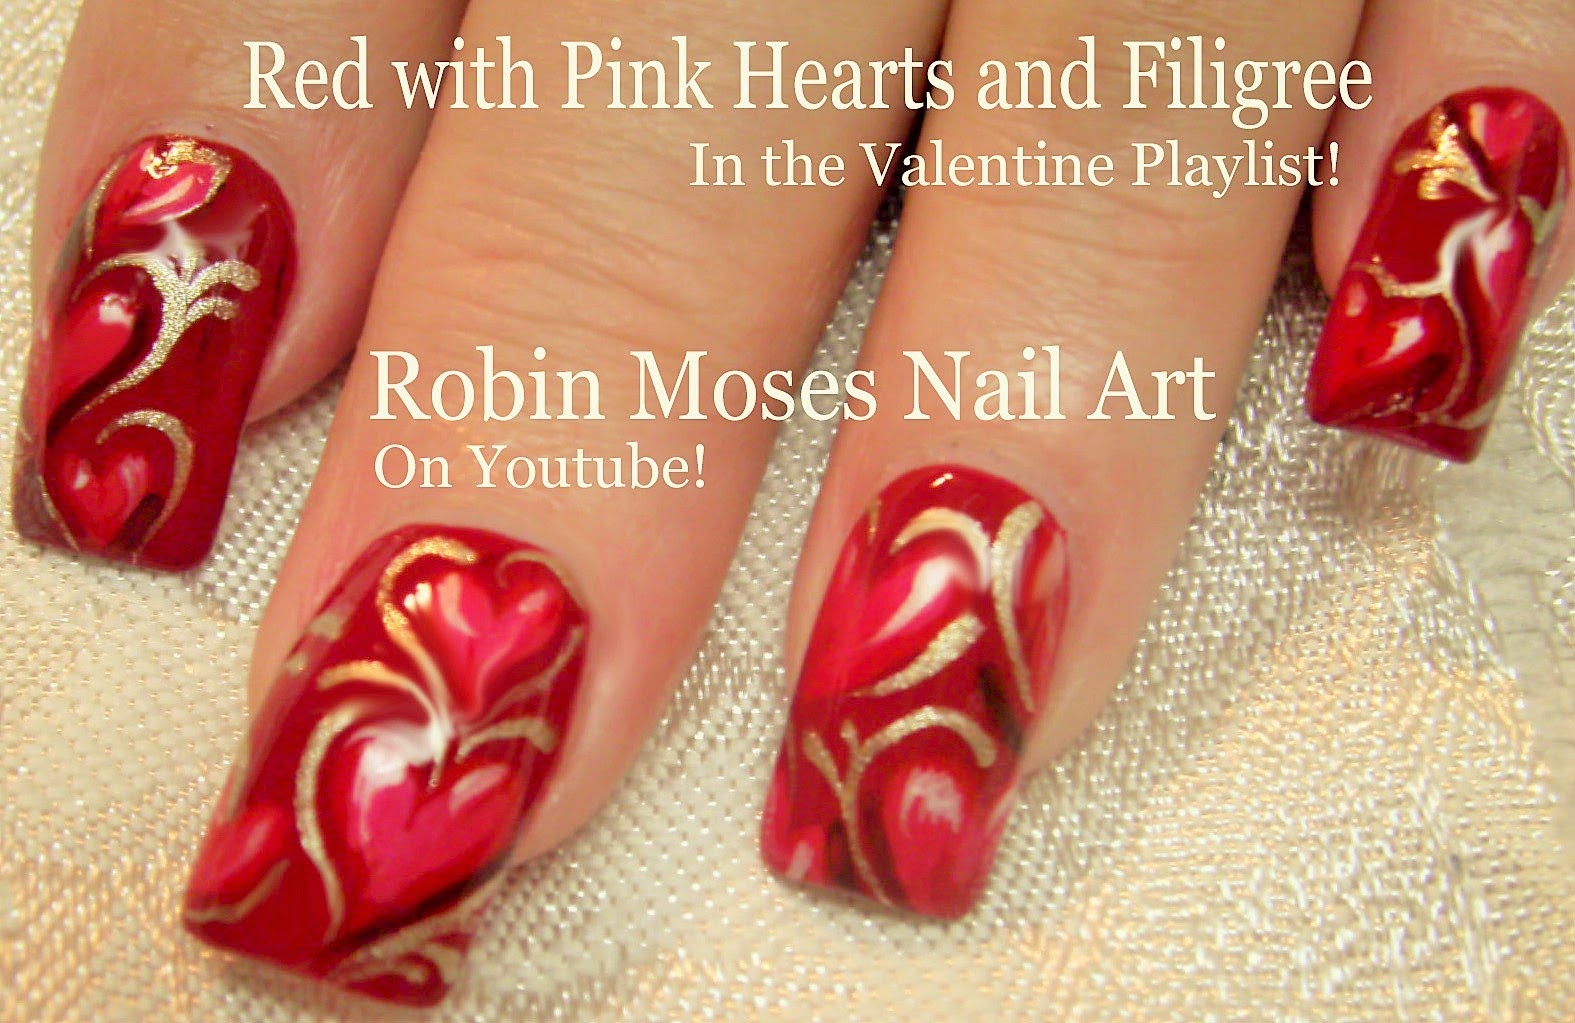 Red and Pink Valentine's Day Nail Art Ideas - wide 2